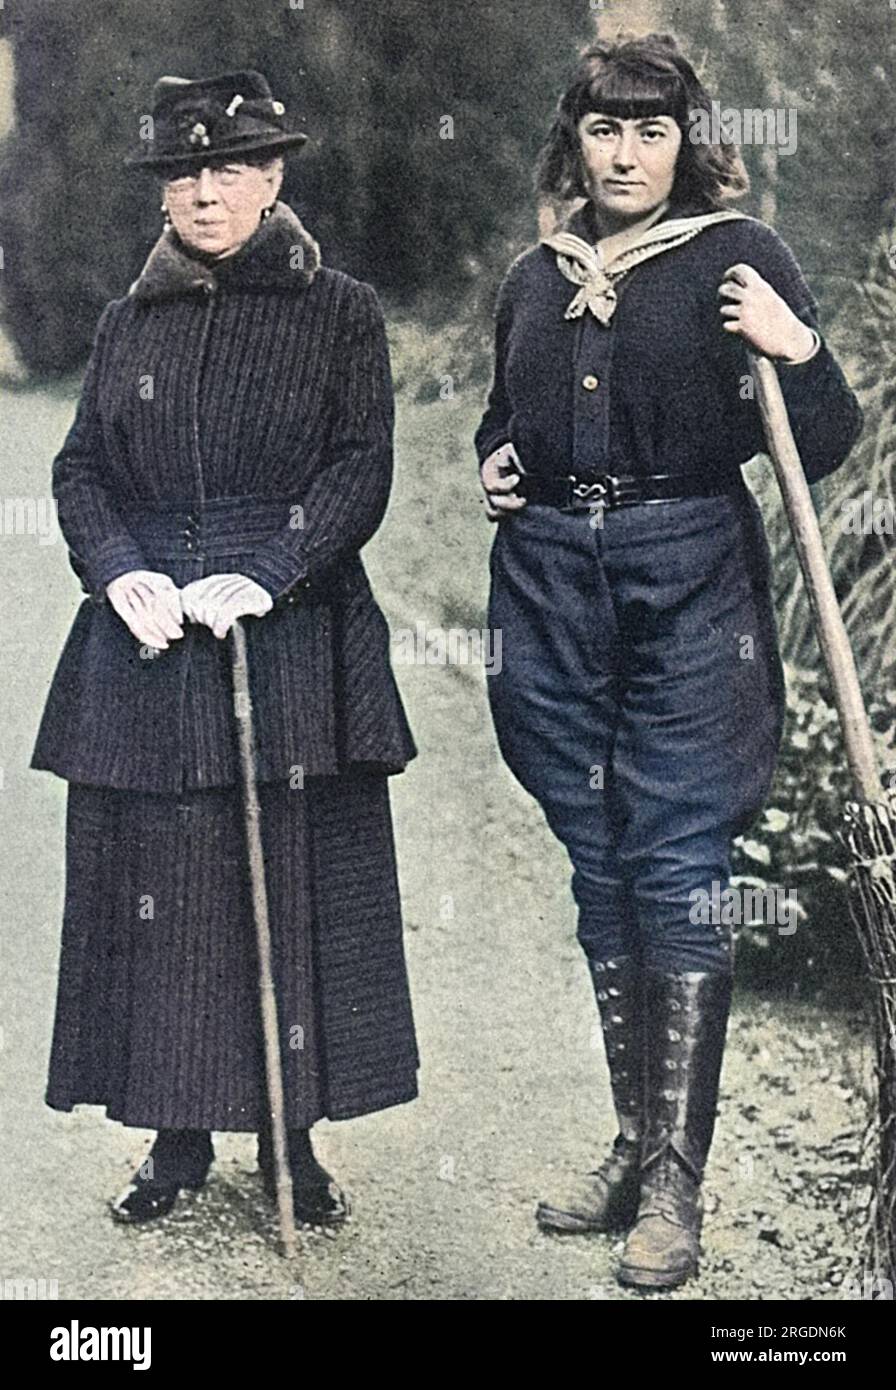 https://c8.alamy.com/comp/2RGDN6K/lady-cowdray-a-strong-supporter-of-the-womens-land-council-seen-with-one-of-the-many-lady-gardeners-who-was-employed-on-her-large-estate-at-cowdray-park-midhurst-during-the-first-world-war-the-sensible-work-dress-worn-by-the-girl-was-her-own-design-2RGDN6K.jpg